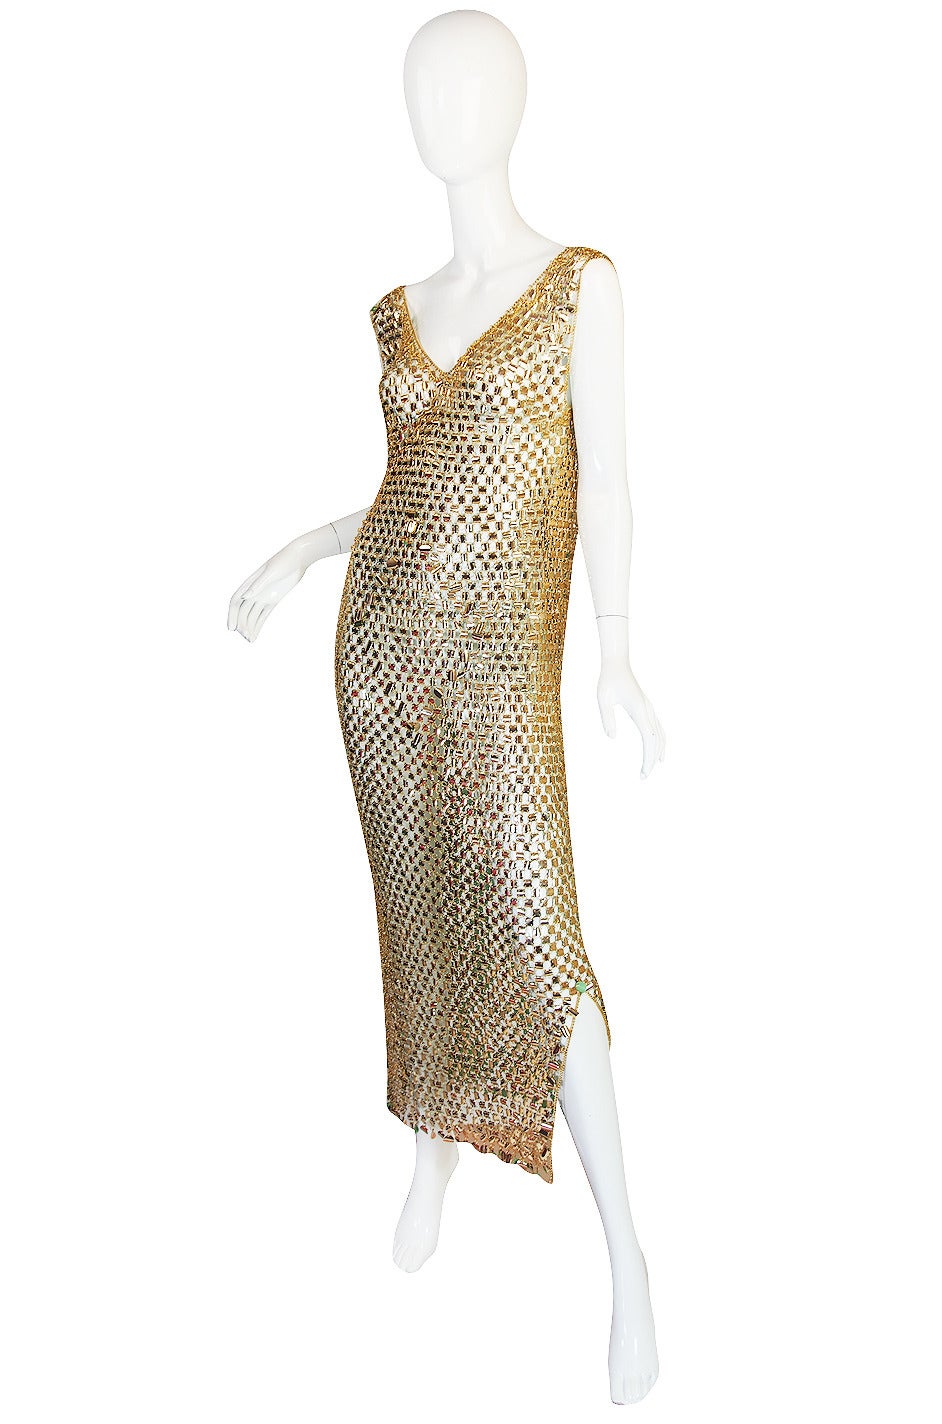 Early Rabanne pieces are so rare to find and I have three spectacular example of his work in the shop today. This one is a stunning plasticized aluminum chain mail dress in gold with the signature green backing that this particular range of dresses